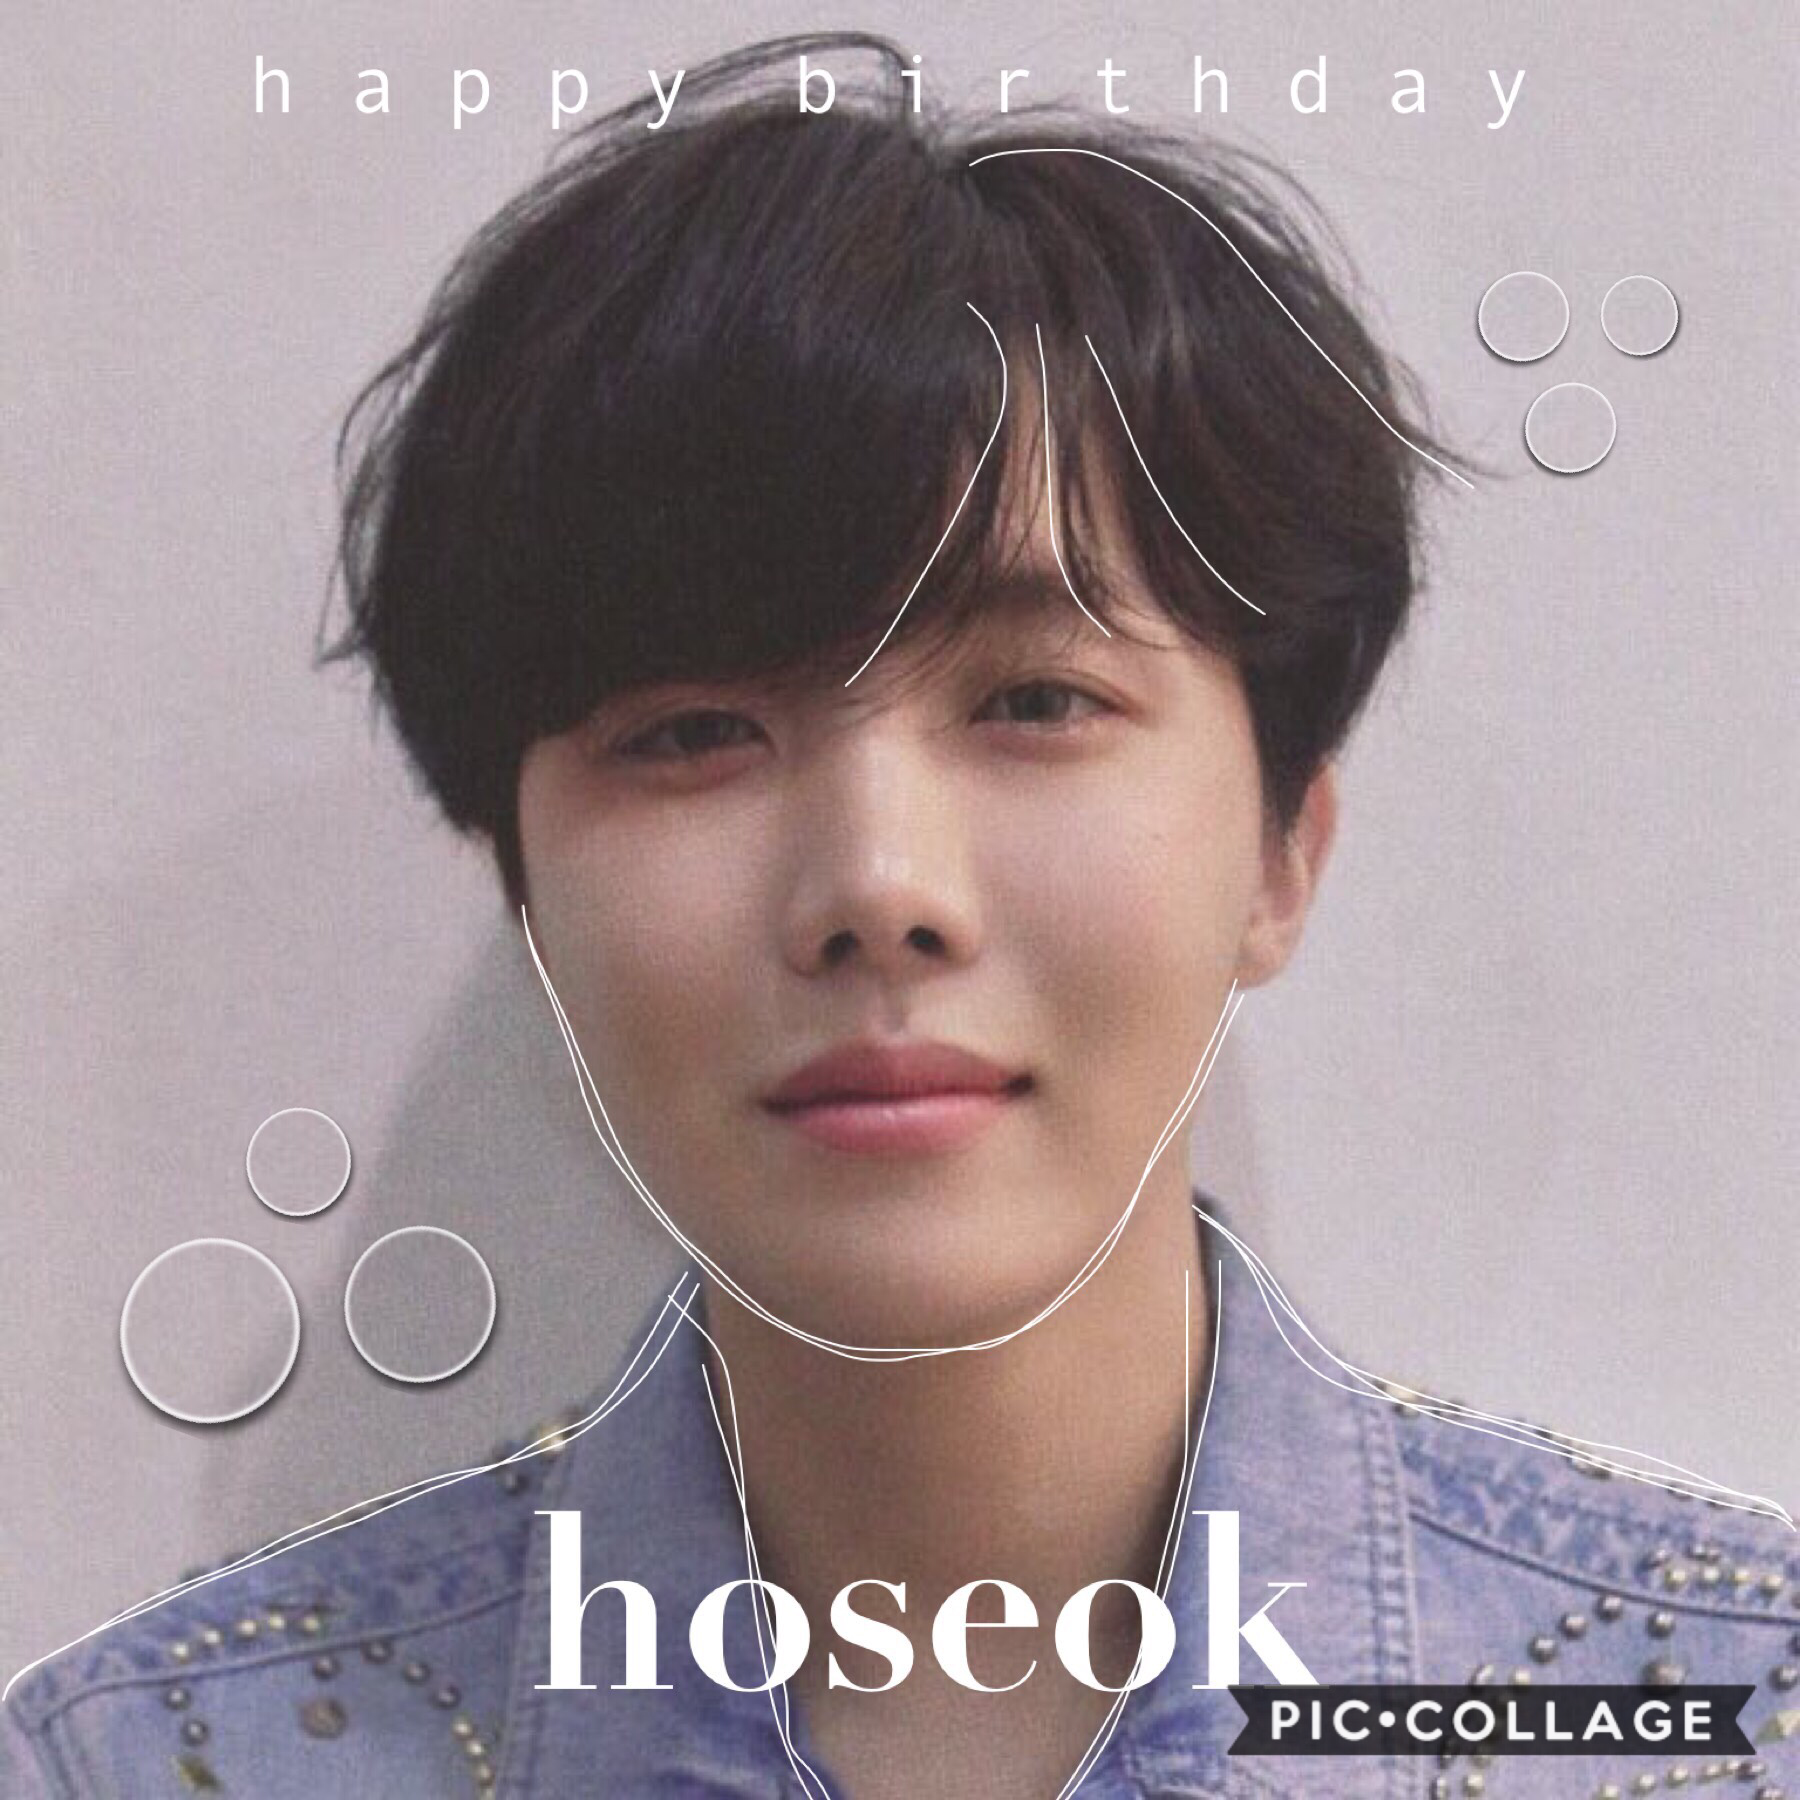 HAPPY (late) BIRTHDAY HOBI, HOPE YOU HAD A WONDERFUL DAY AND I WISH YOU NOTHING BUT HAPPINESS AND GOOD LUCK❤️❤️❤️